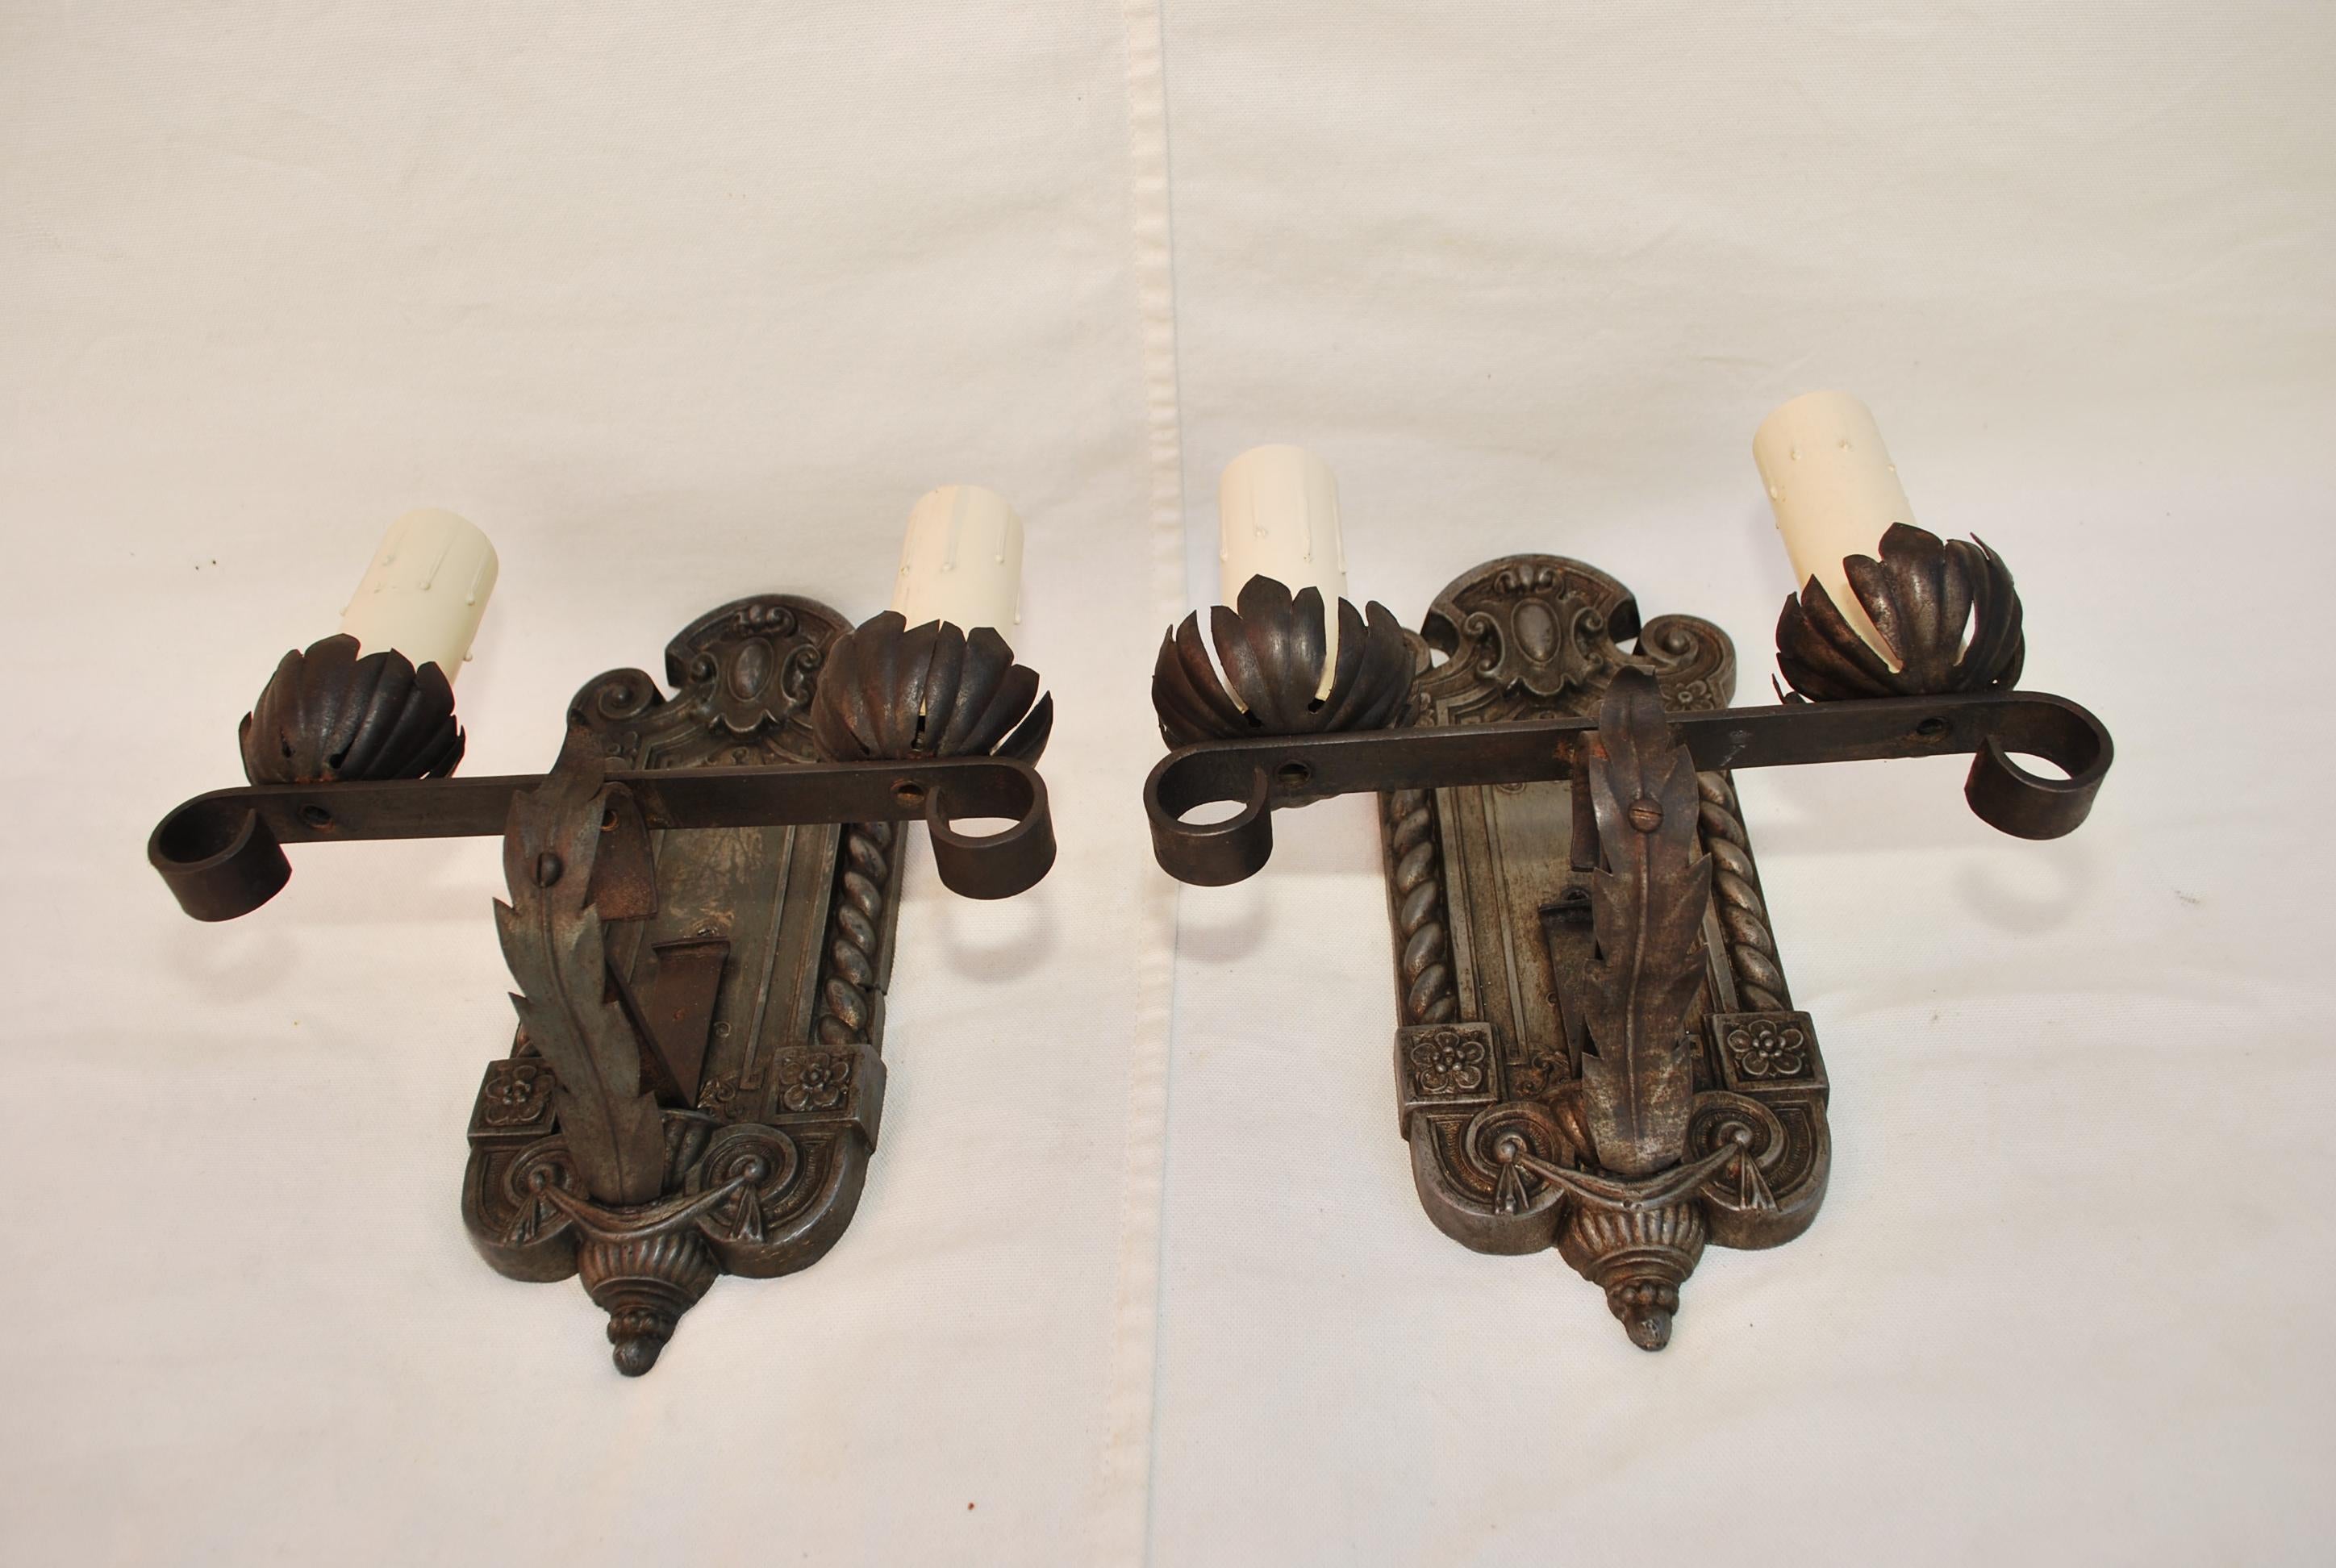 An elegant pair of 1920's sconces, the patina is allot nicer in person